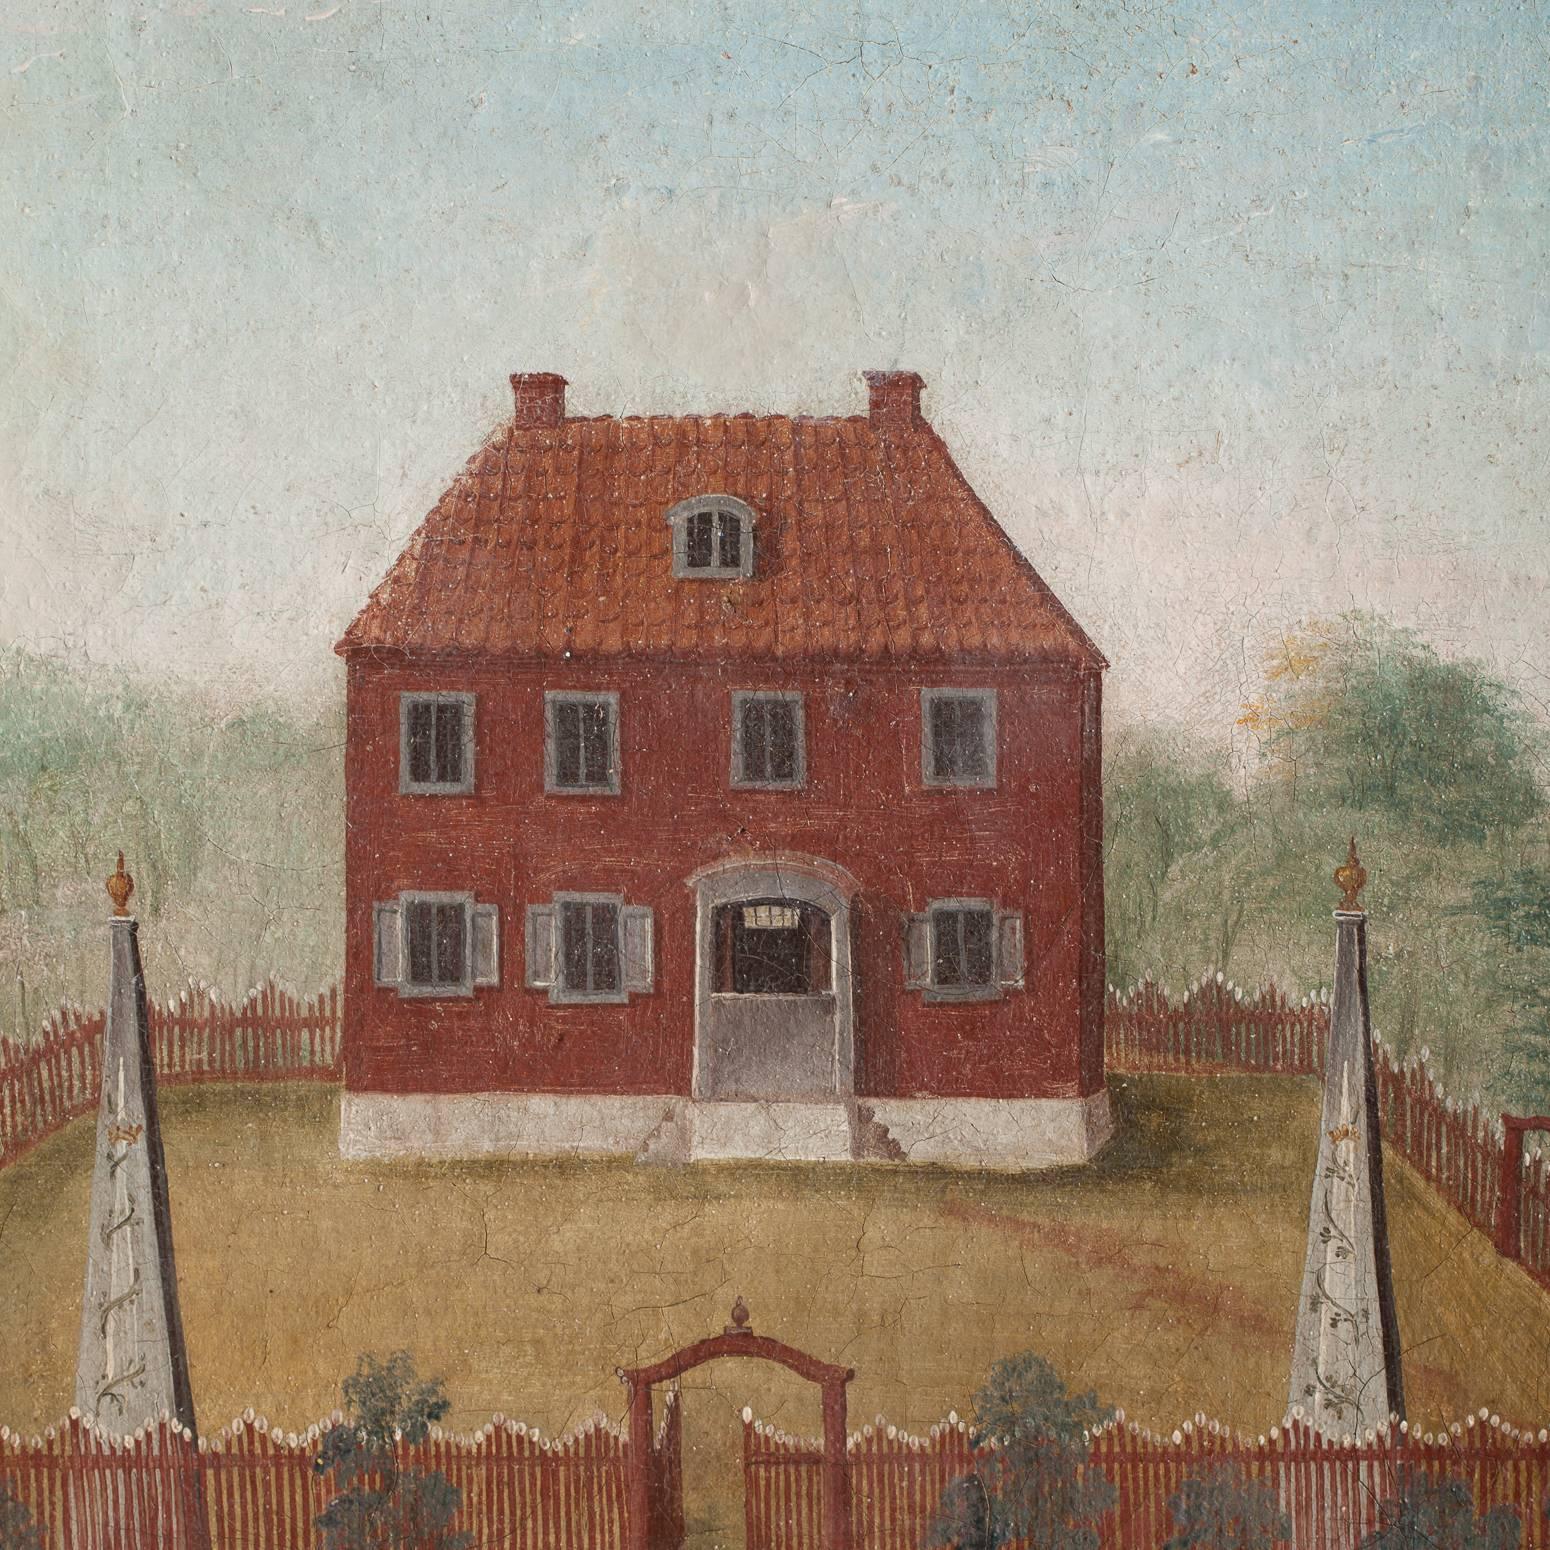 This charming Swedish, Folk Art painting depicts a very prominent estate in Halsingland, where water power was used in manufacturing. The painting probably decorated the wall in the house and was removed sometime later with its original frame. This